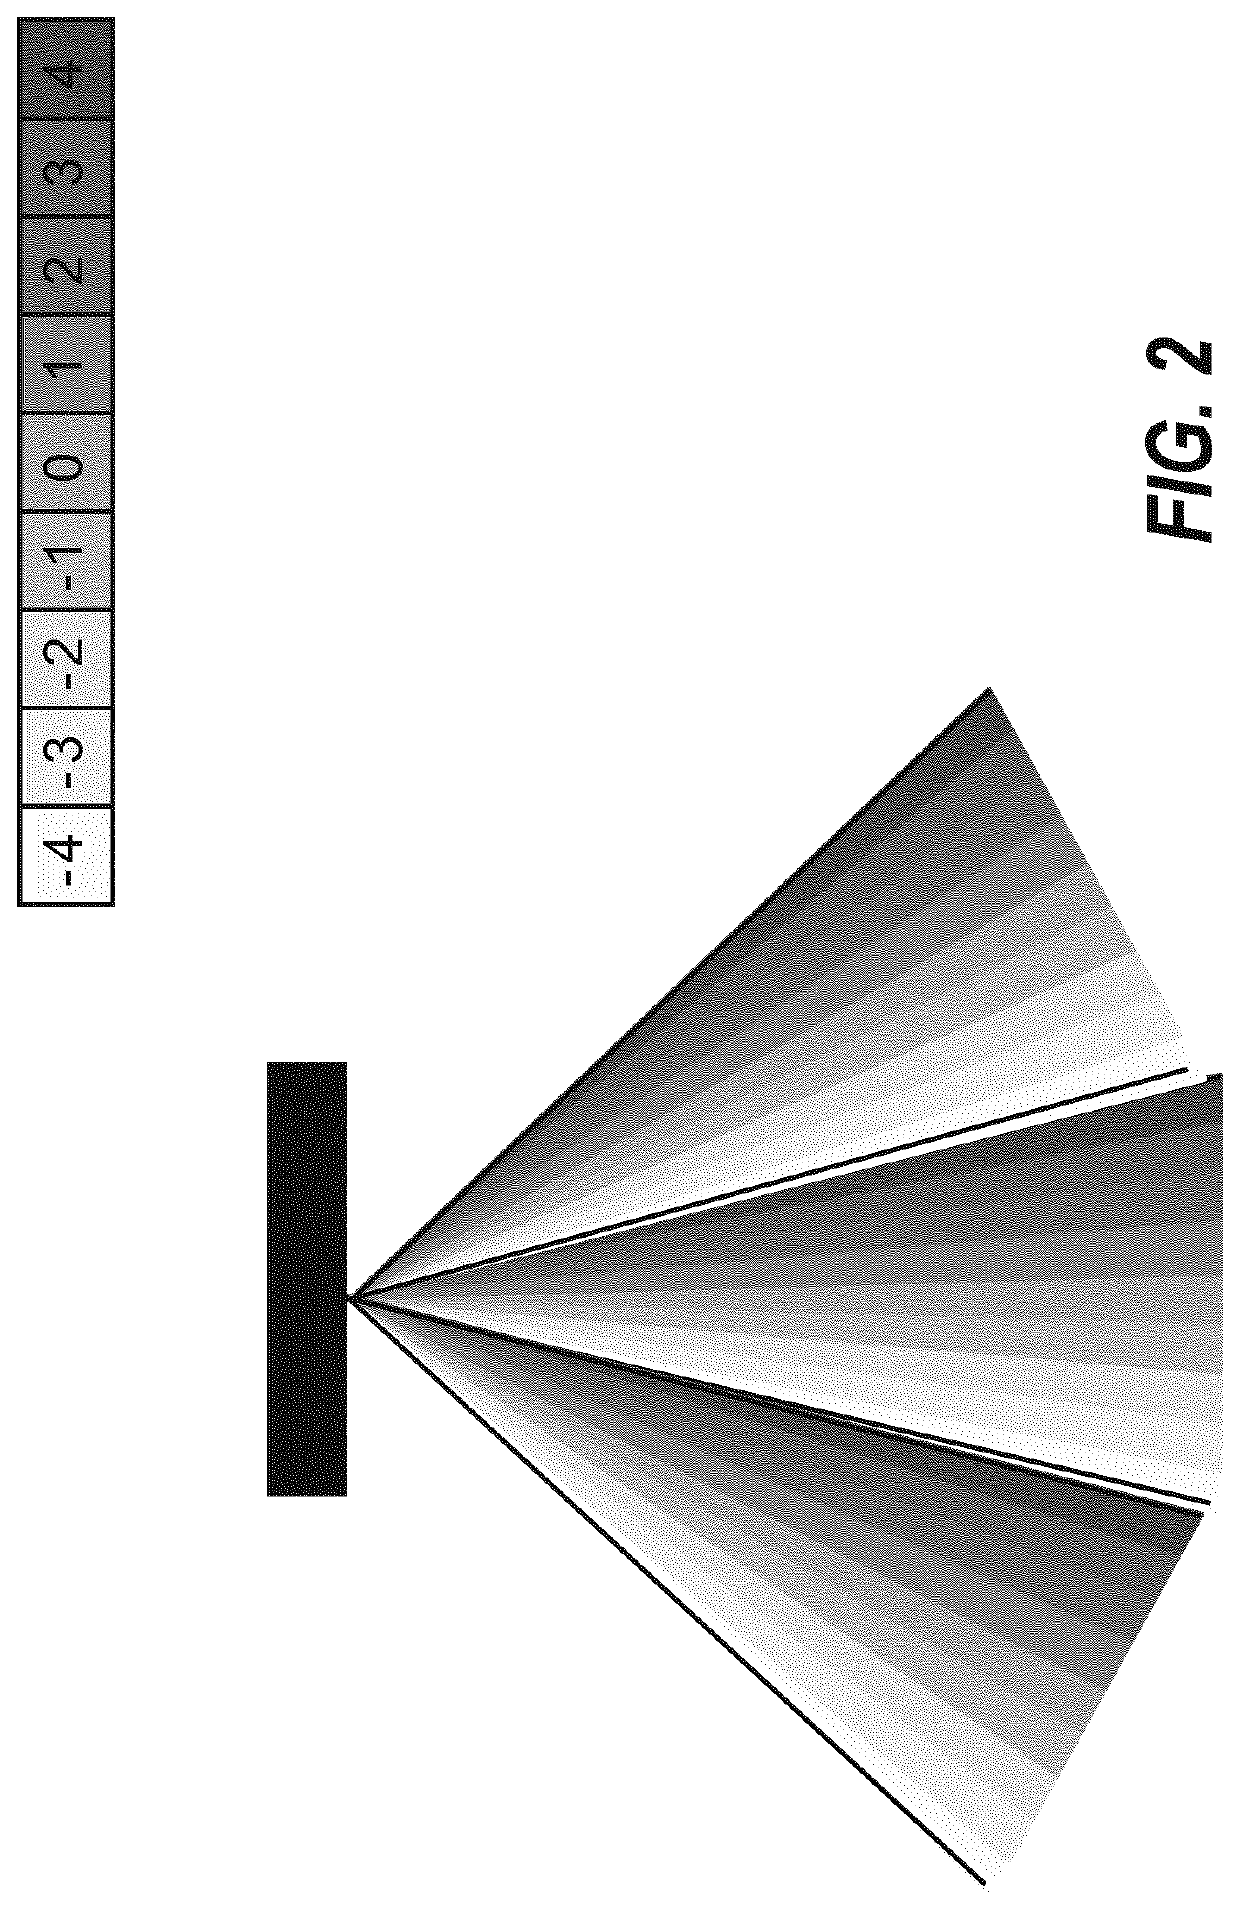 Generation of image for an autostereoscopic display